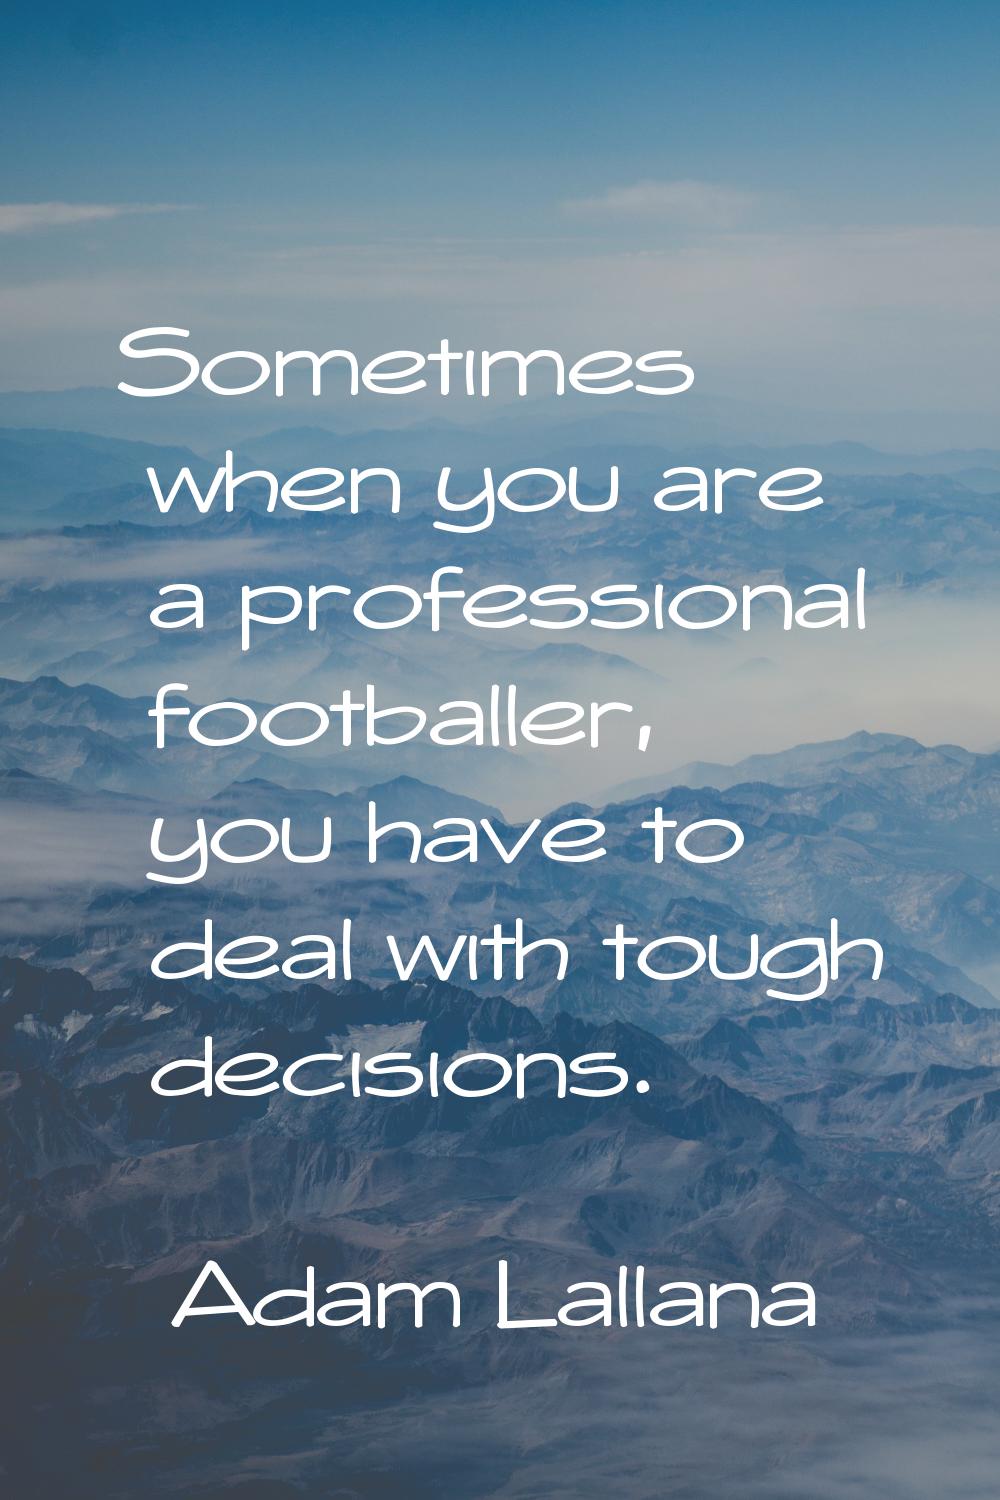 Sometimes when you are a professional footballer, you have to deal with tough decisions.